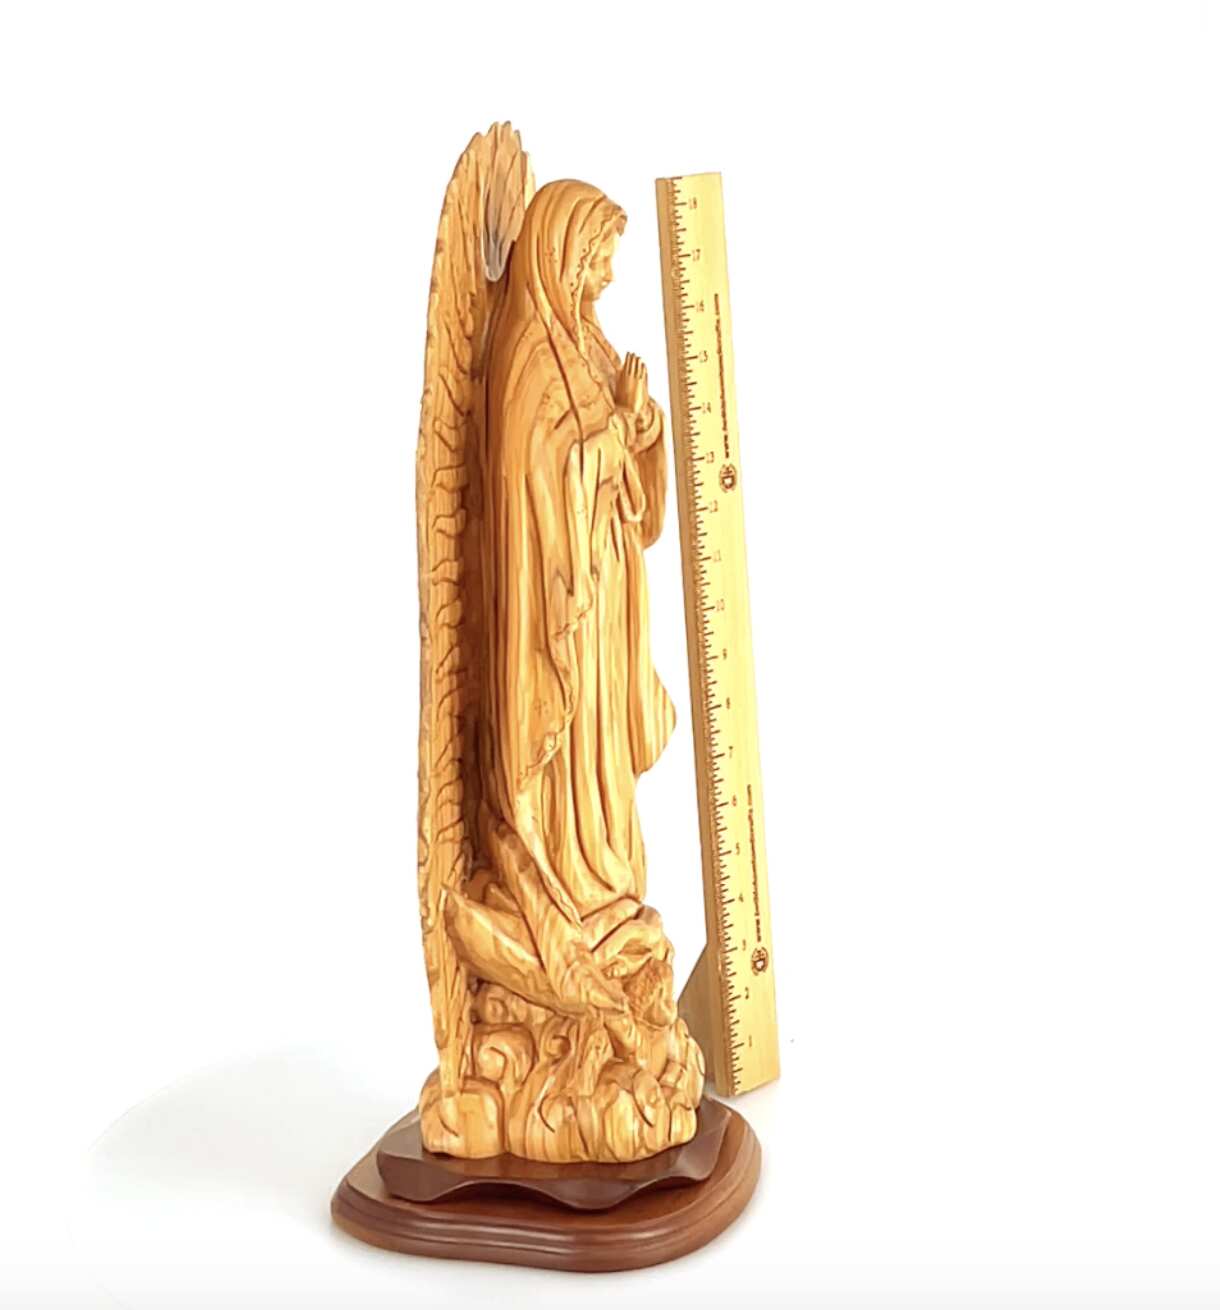 Virgin Mary “Our Lady of Guadalupe” Statue, 20.7" Carving from Holy Land Olive Wood